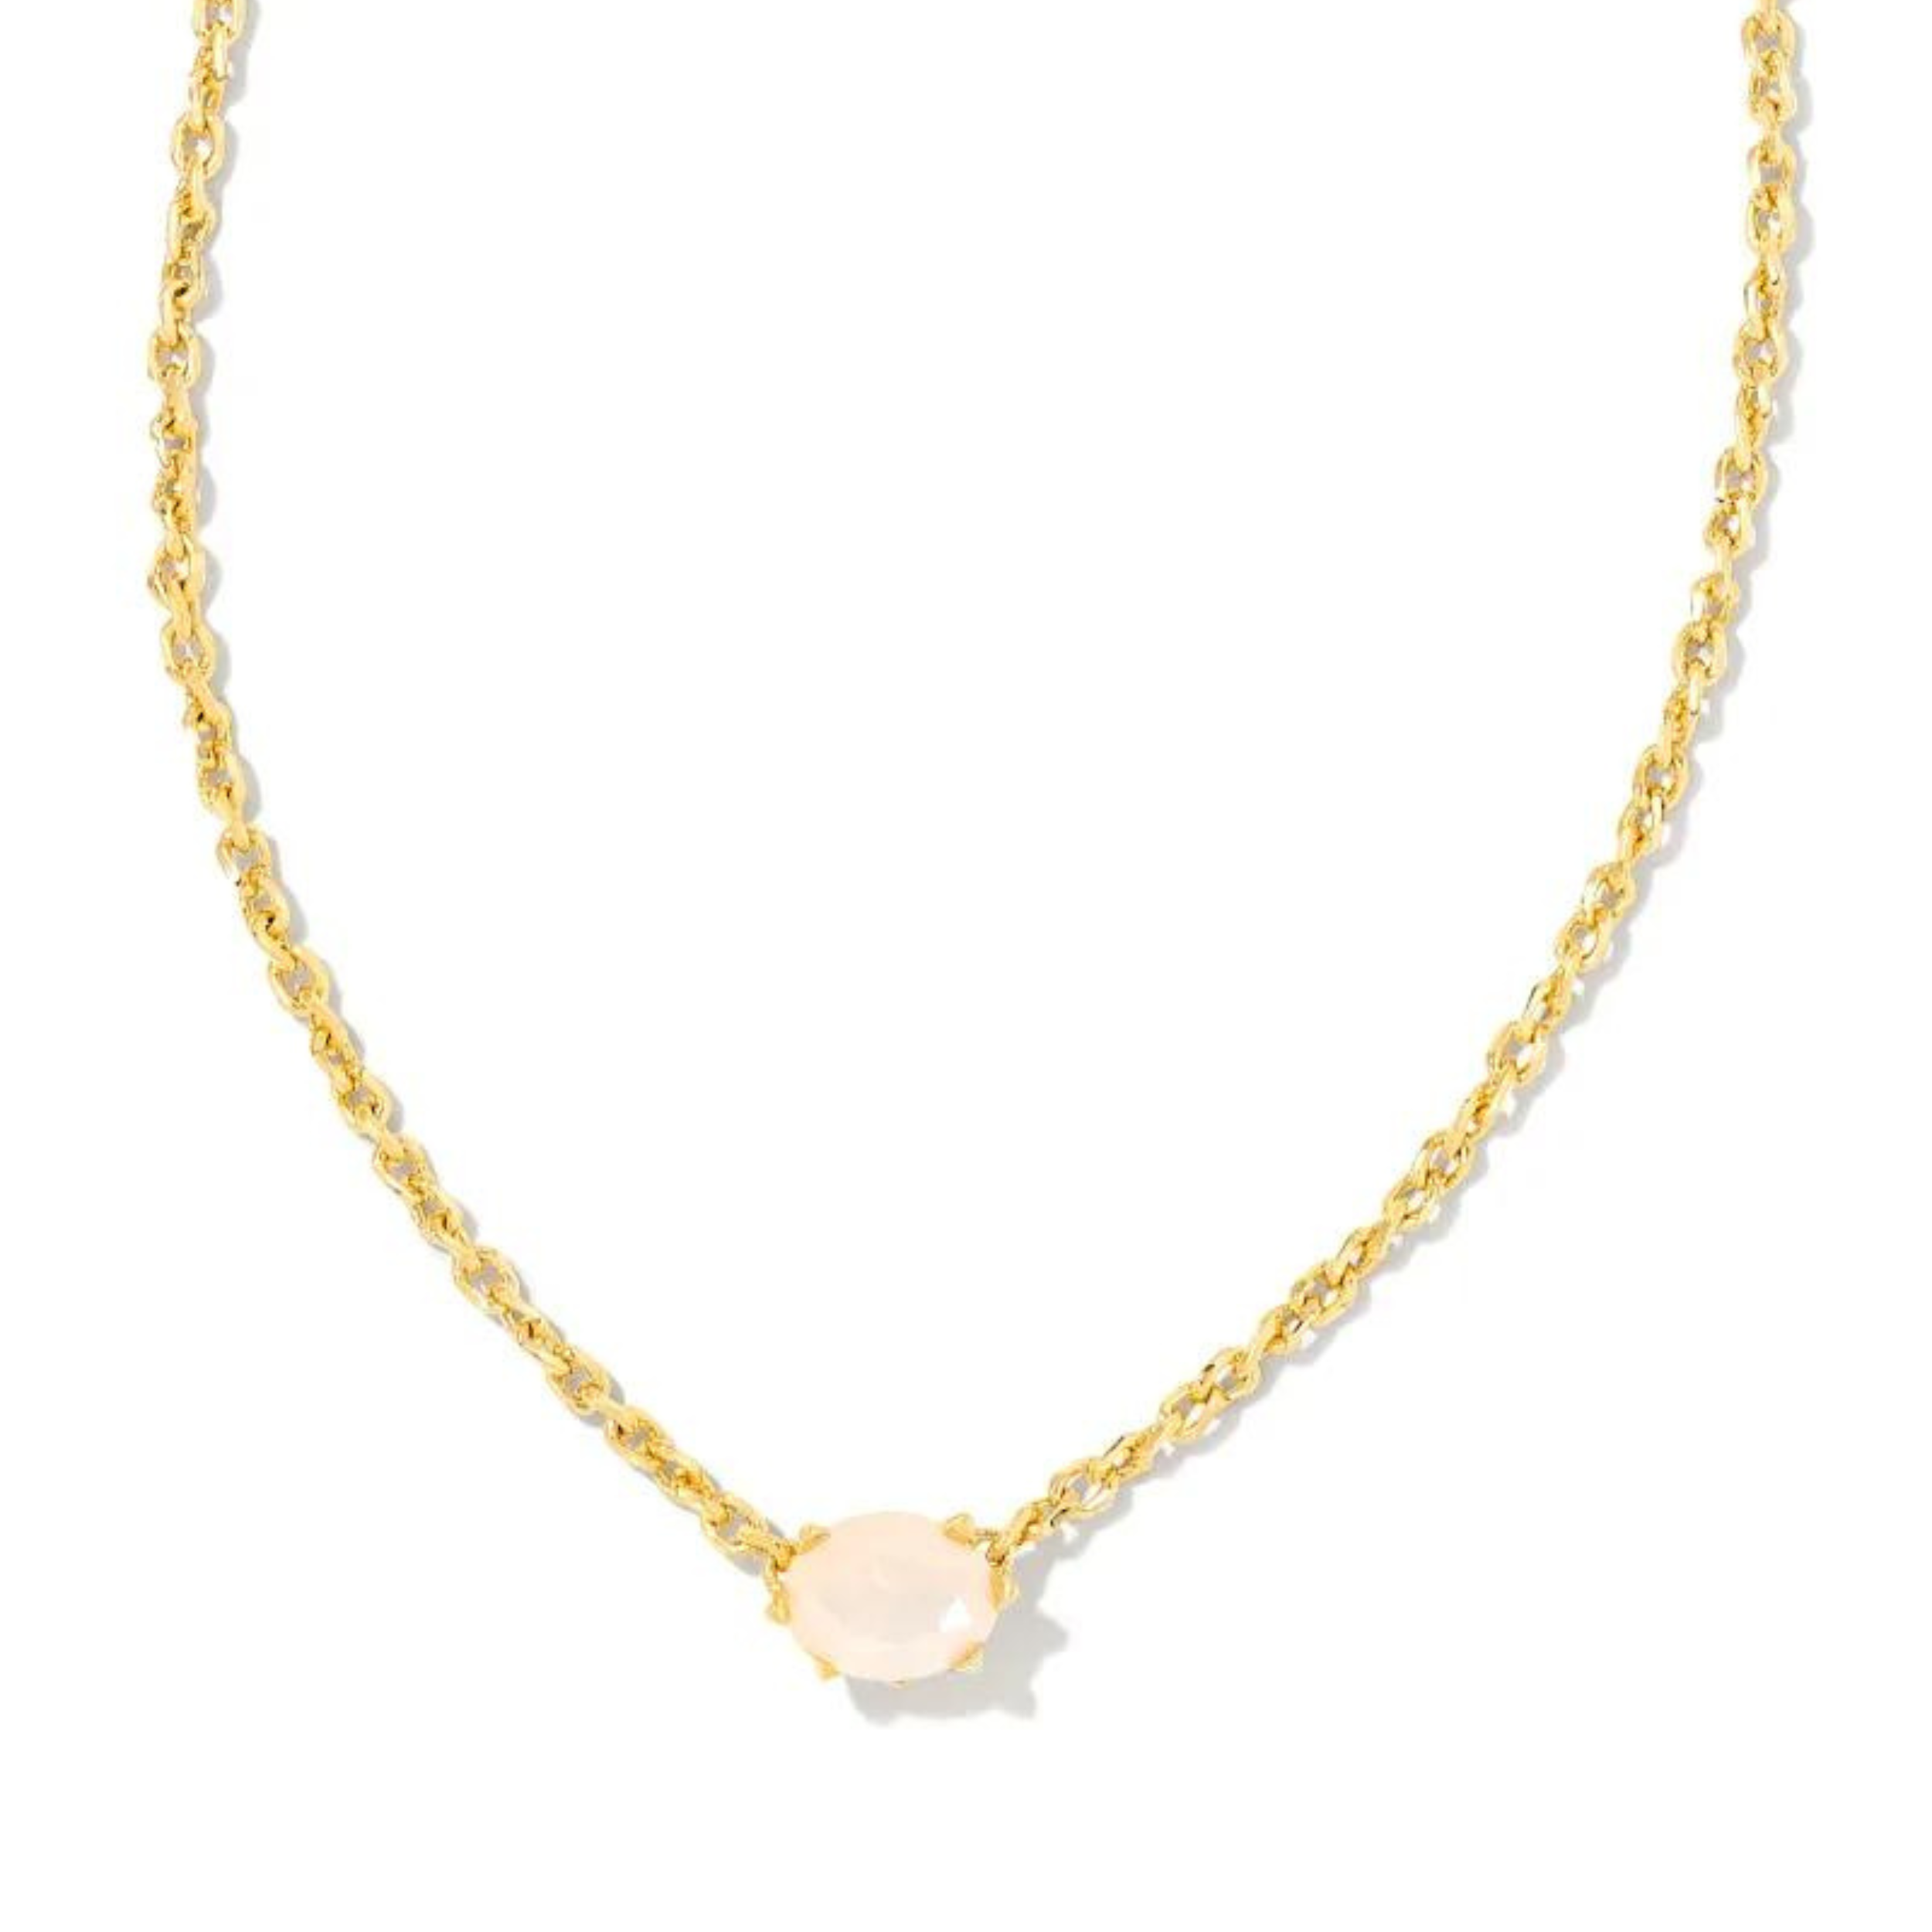 Kendra Scott | Cailin Gold Pendant Necklace in Champagne Opal Crystal